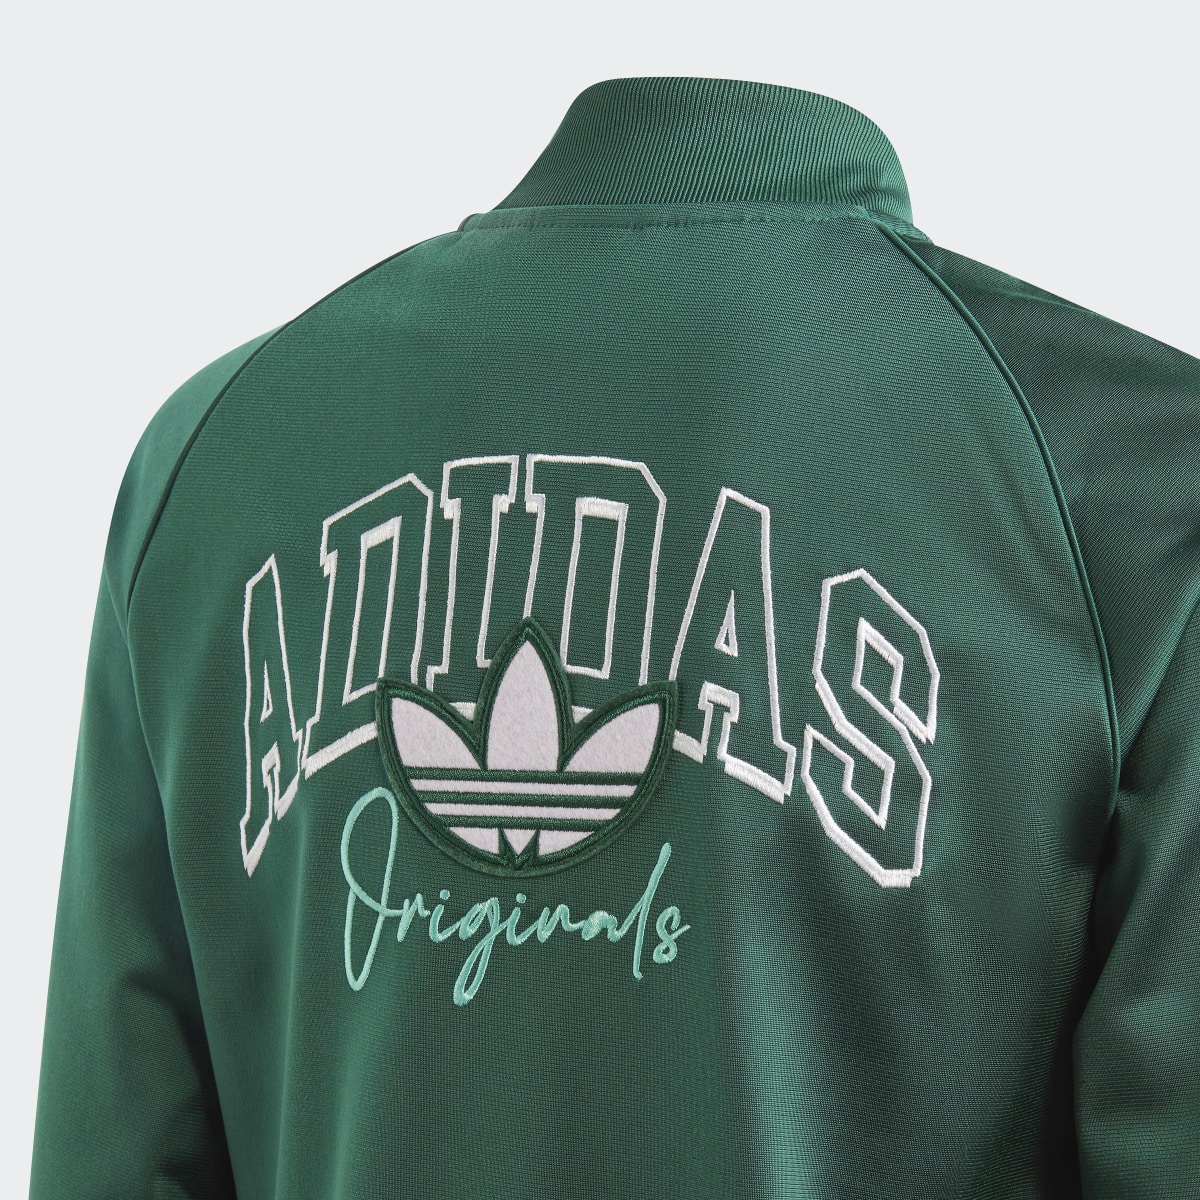 Adidas Collegiate Graphic Pack SST Track Top. 5